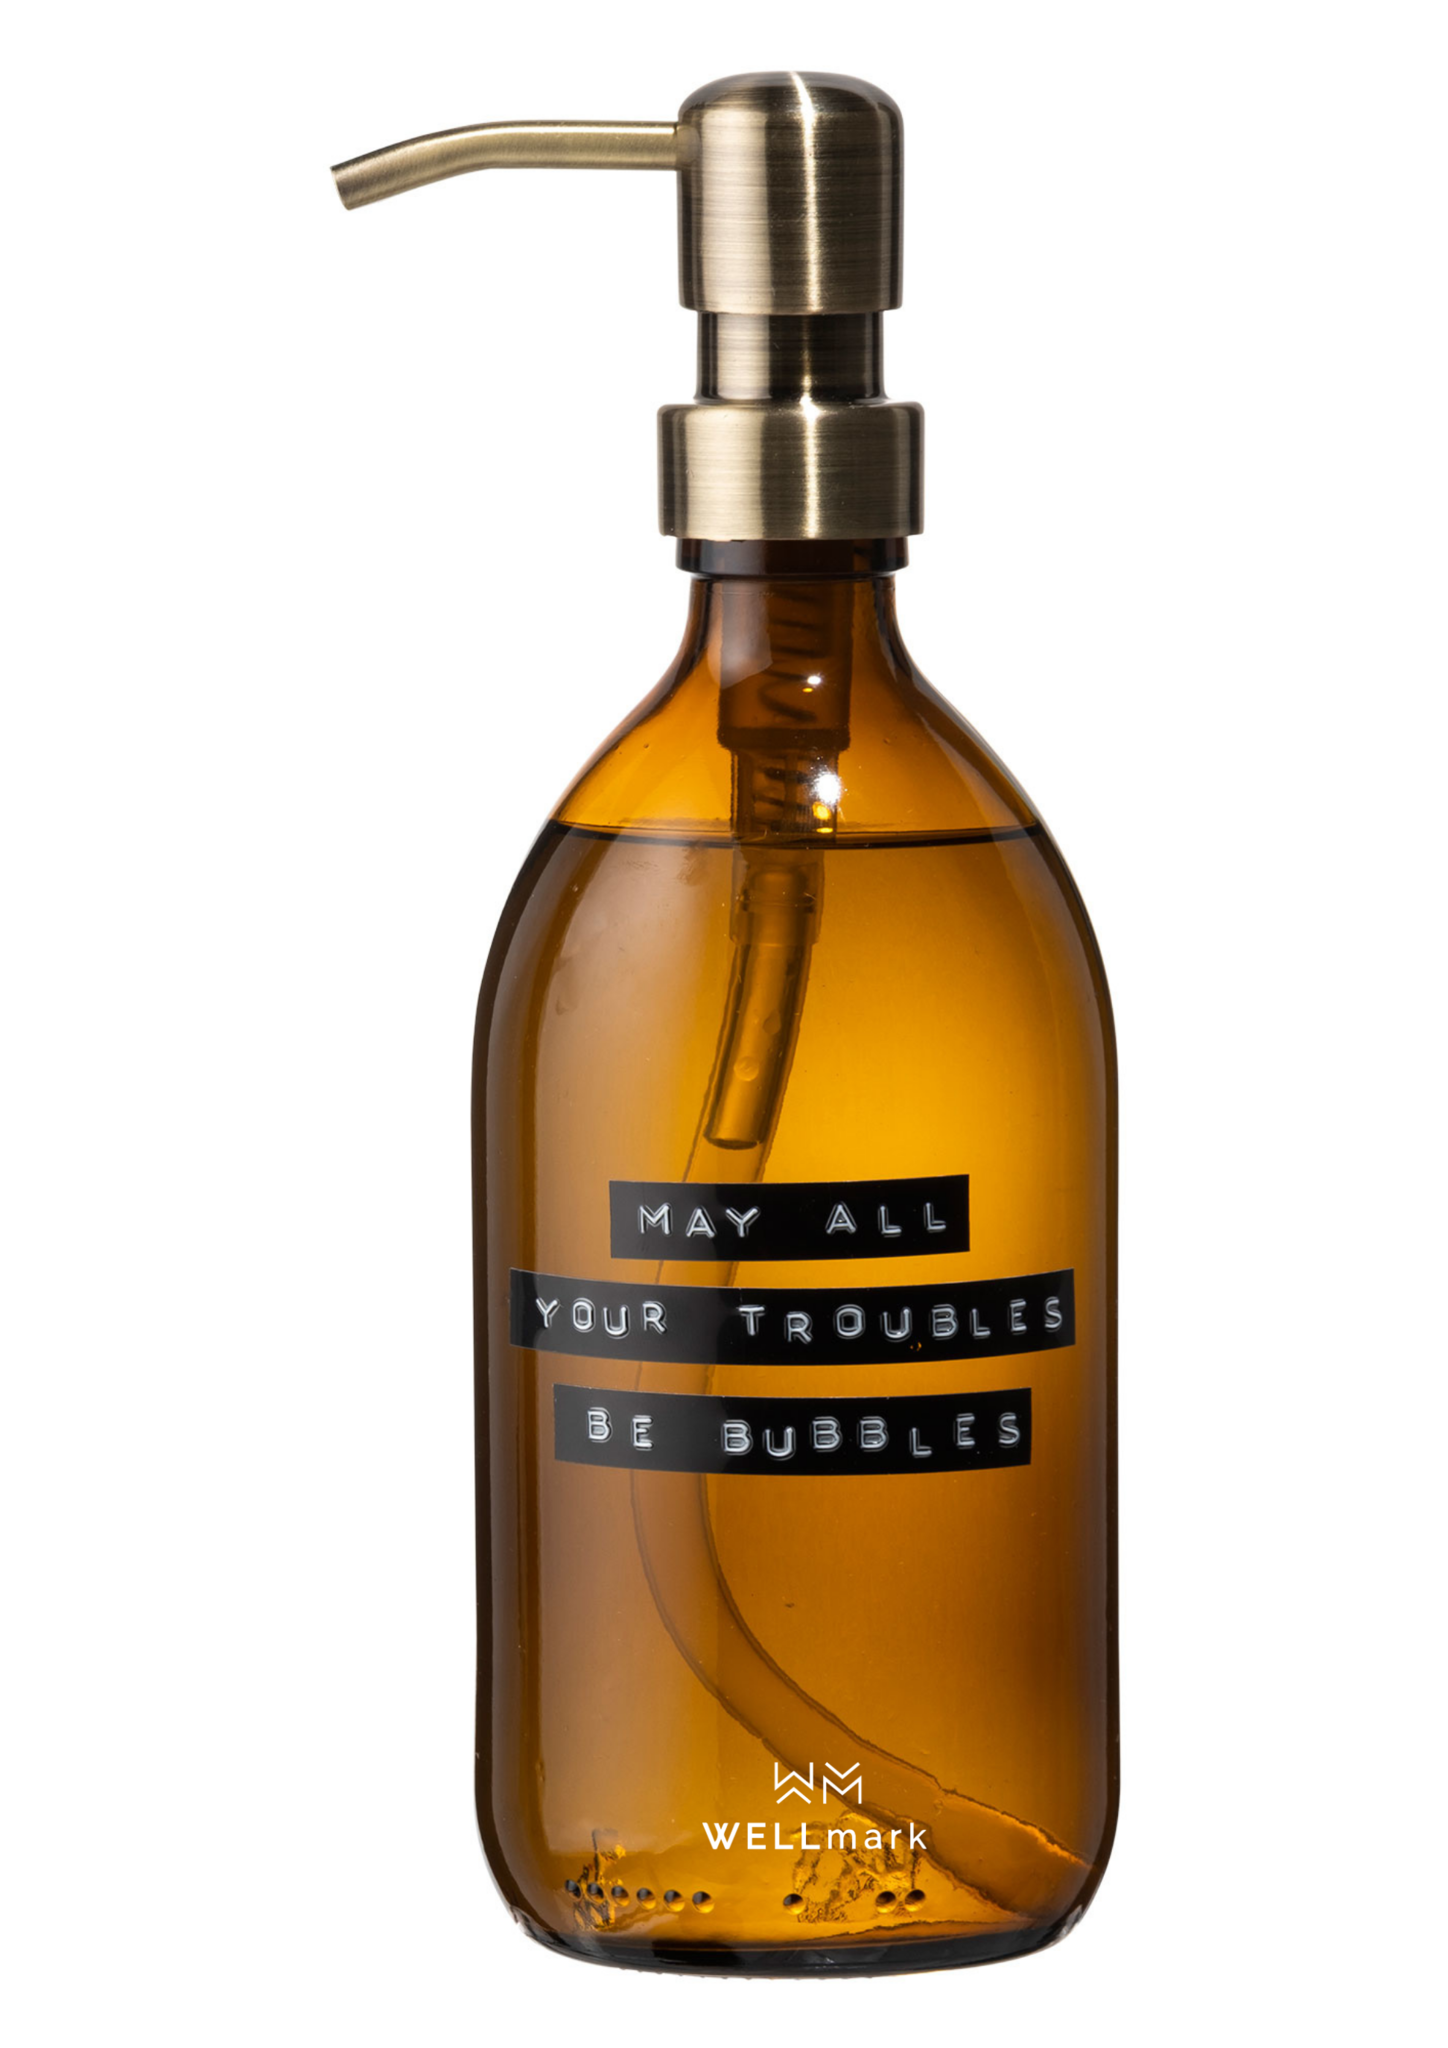 Wellmark - hand soap amber/brass bamboo 500ml - may all your troubles